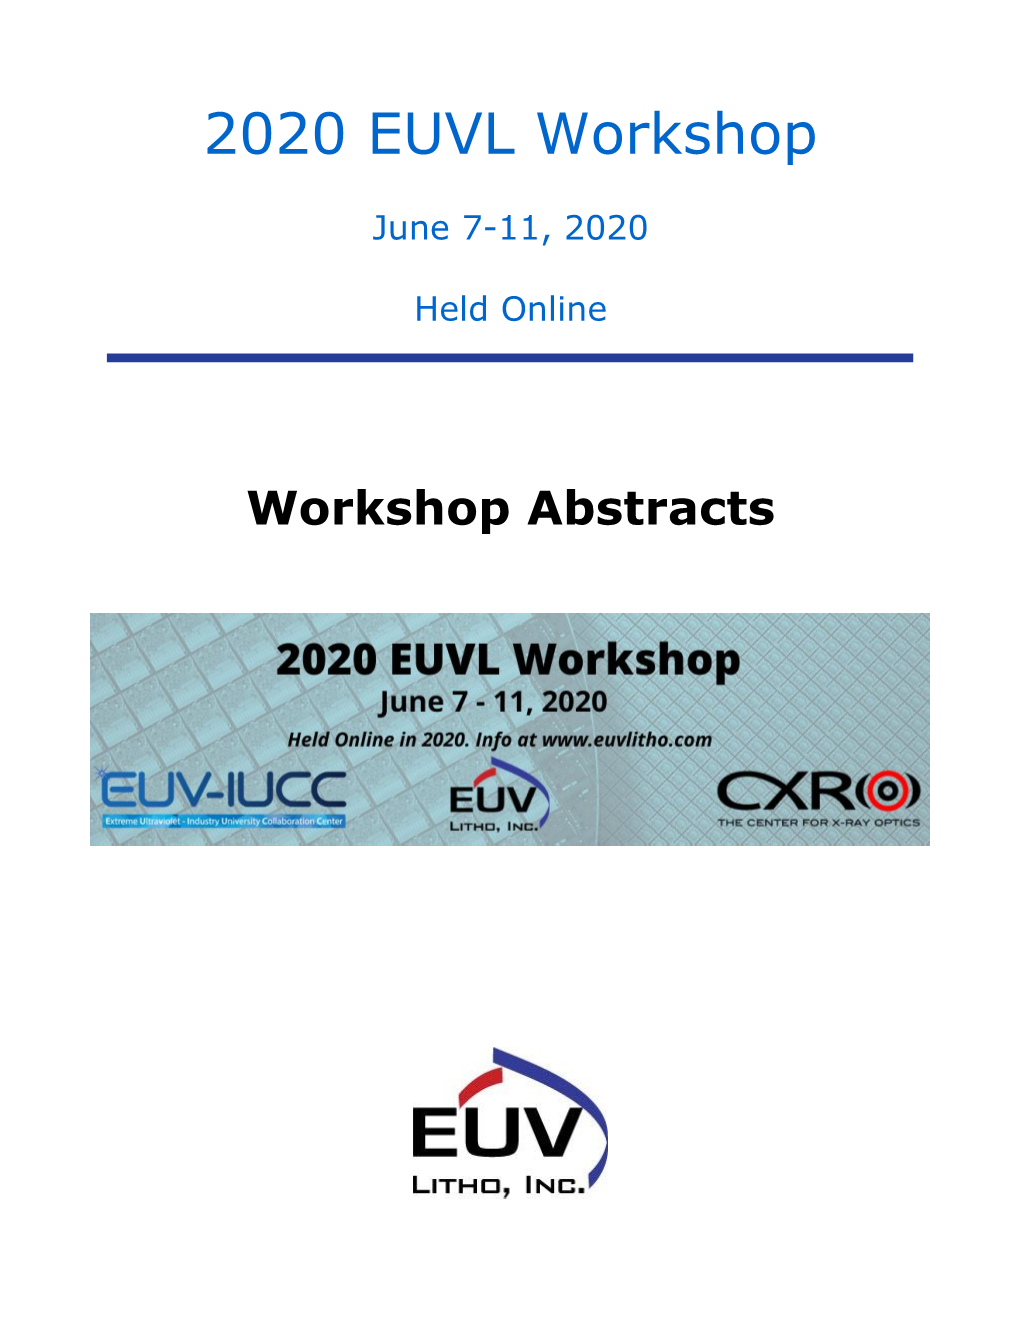 2020 EUVL Workshop – Abstracts